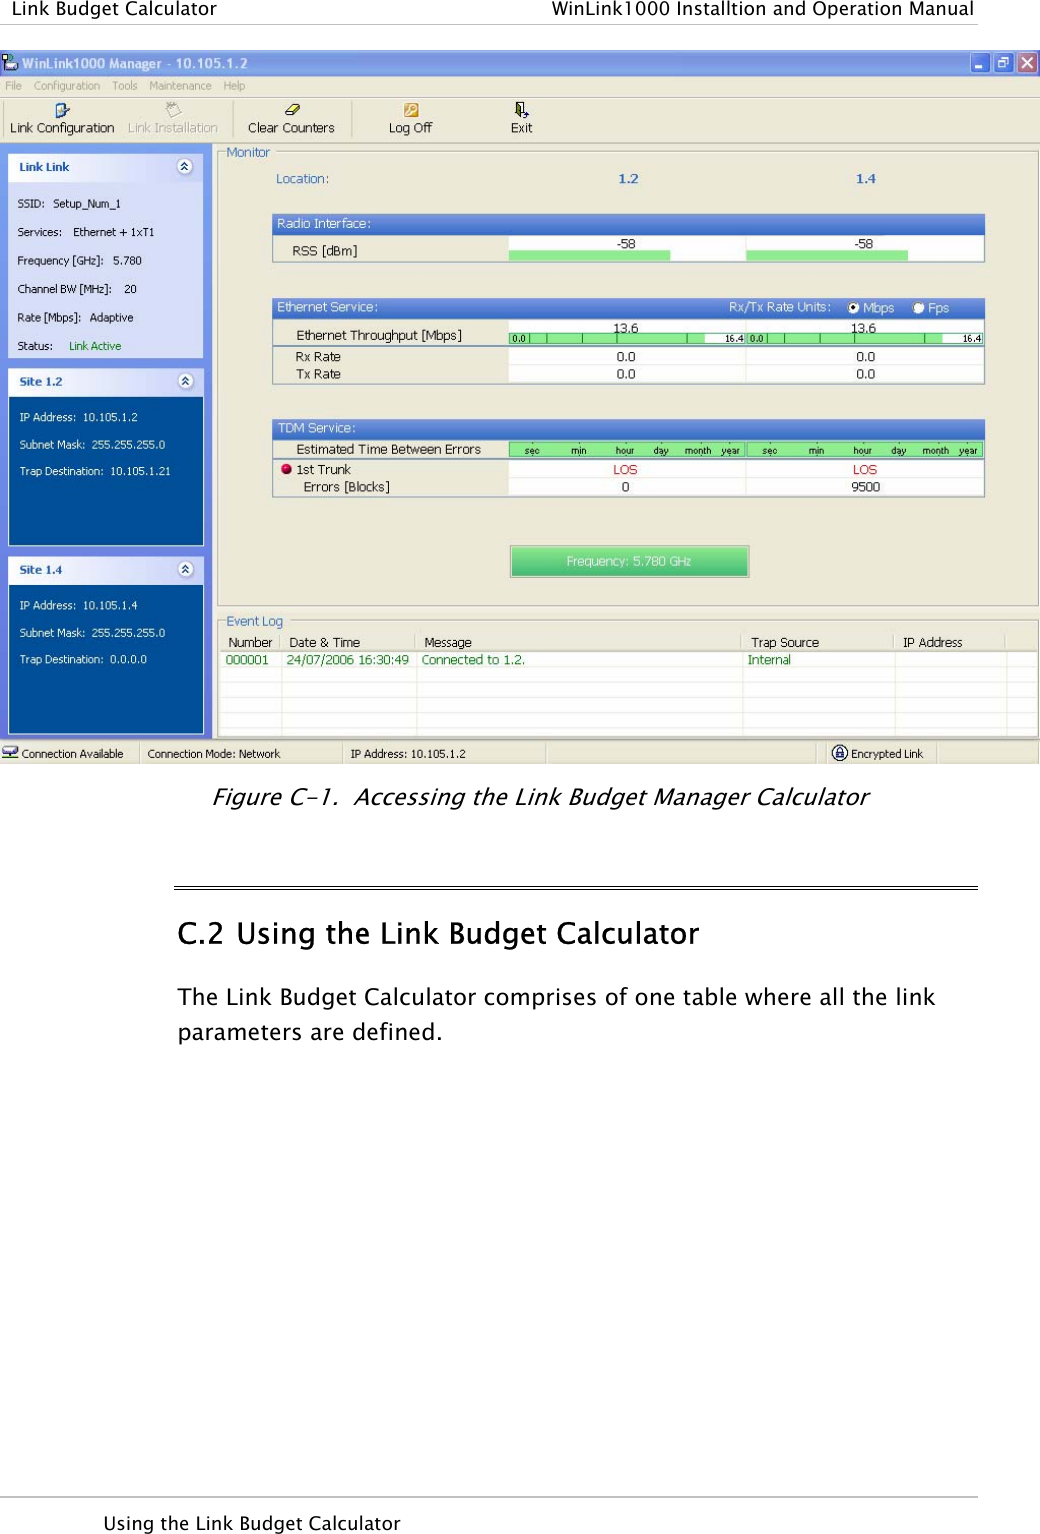   Link Budget Calculator  WinLink1000 Installtion and Operation Manual  Figure  C-1.  Accessing the Link Budget Manager Calculator C.2 Using the Link Budget Calculator The Link Budget Calculator comprises of one table where all the link parameters are defined.   Using the Link Budget Calculator   